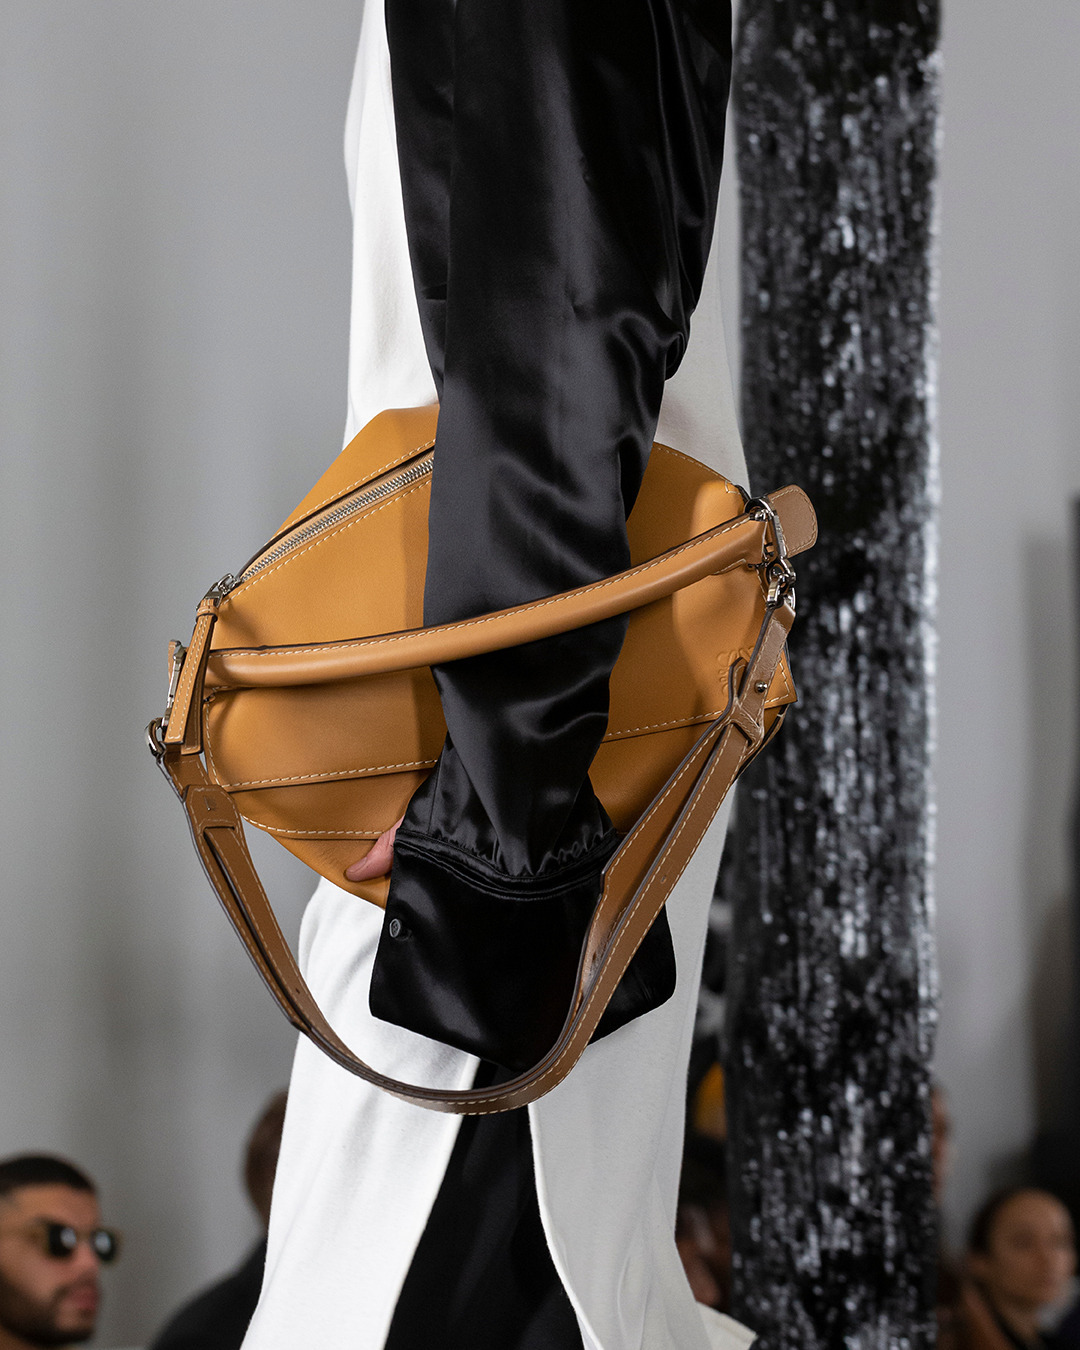 LOEWE - The Large Puzzle Edge bag from the LOEWE Fall Winter 2020 Men's collection is crafted using precisely cut leather facets that combine to create its voluminous shape.

Now available on loewe.co...